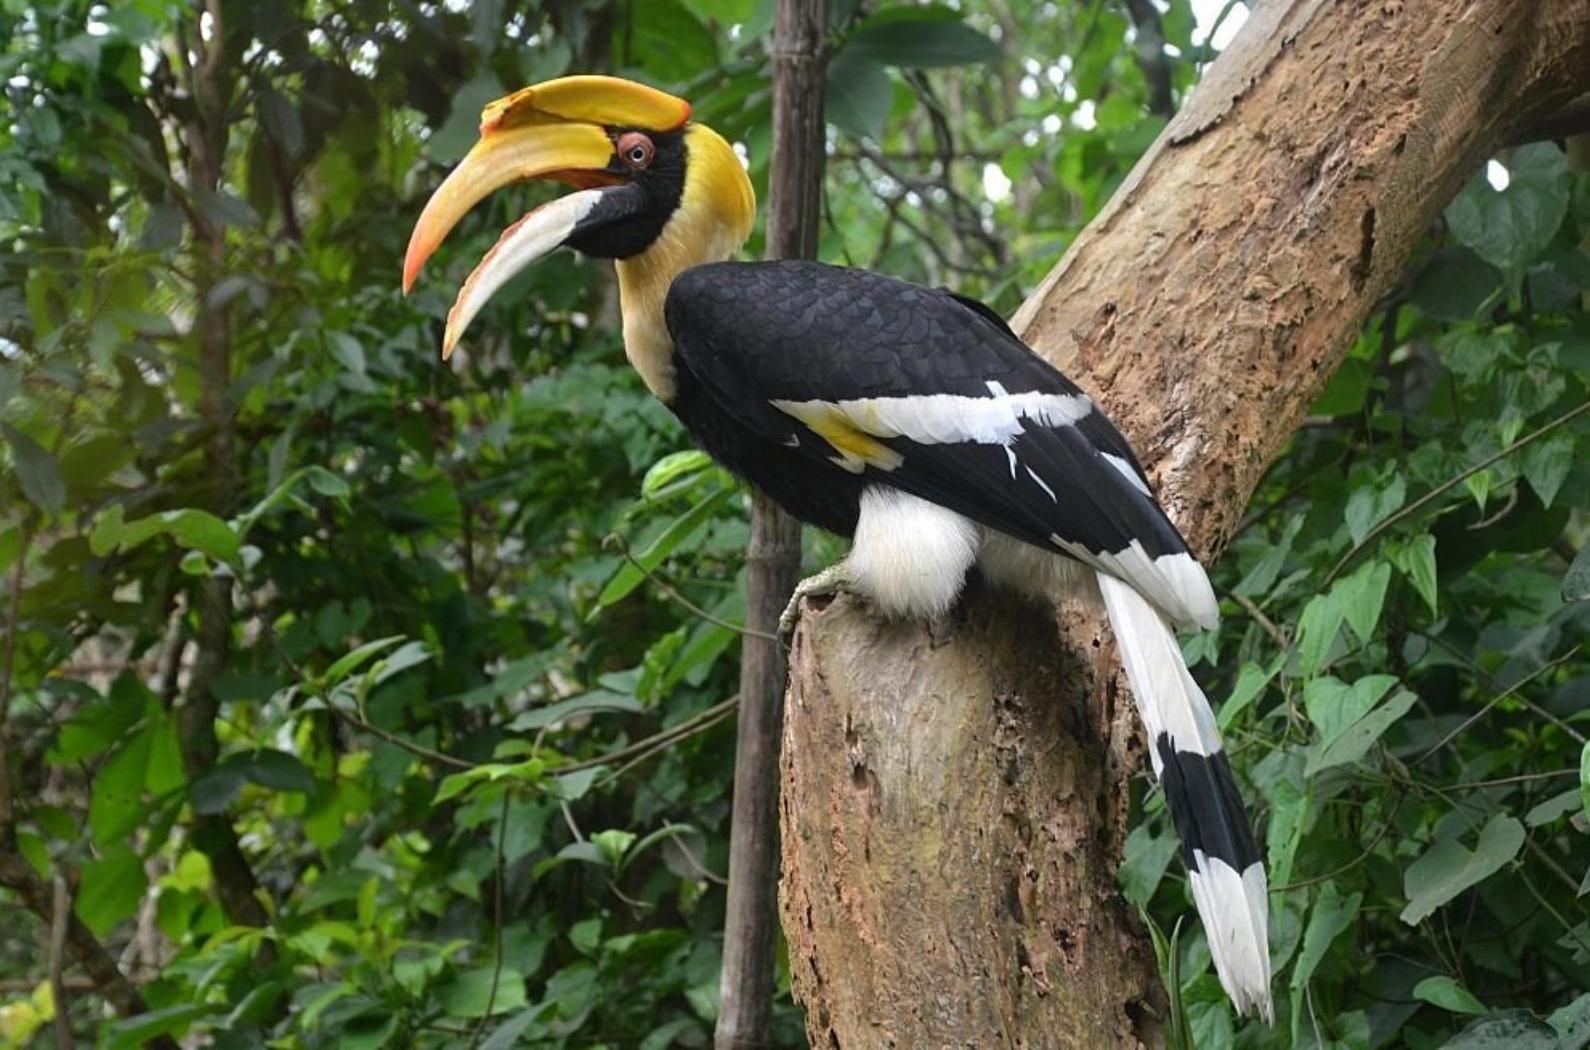 The Great Indian Hornbill is one of the larger members of the hornbill family and it is found largely in Southeast Asia.